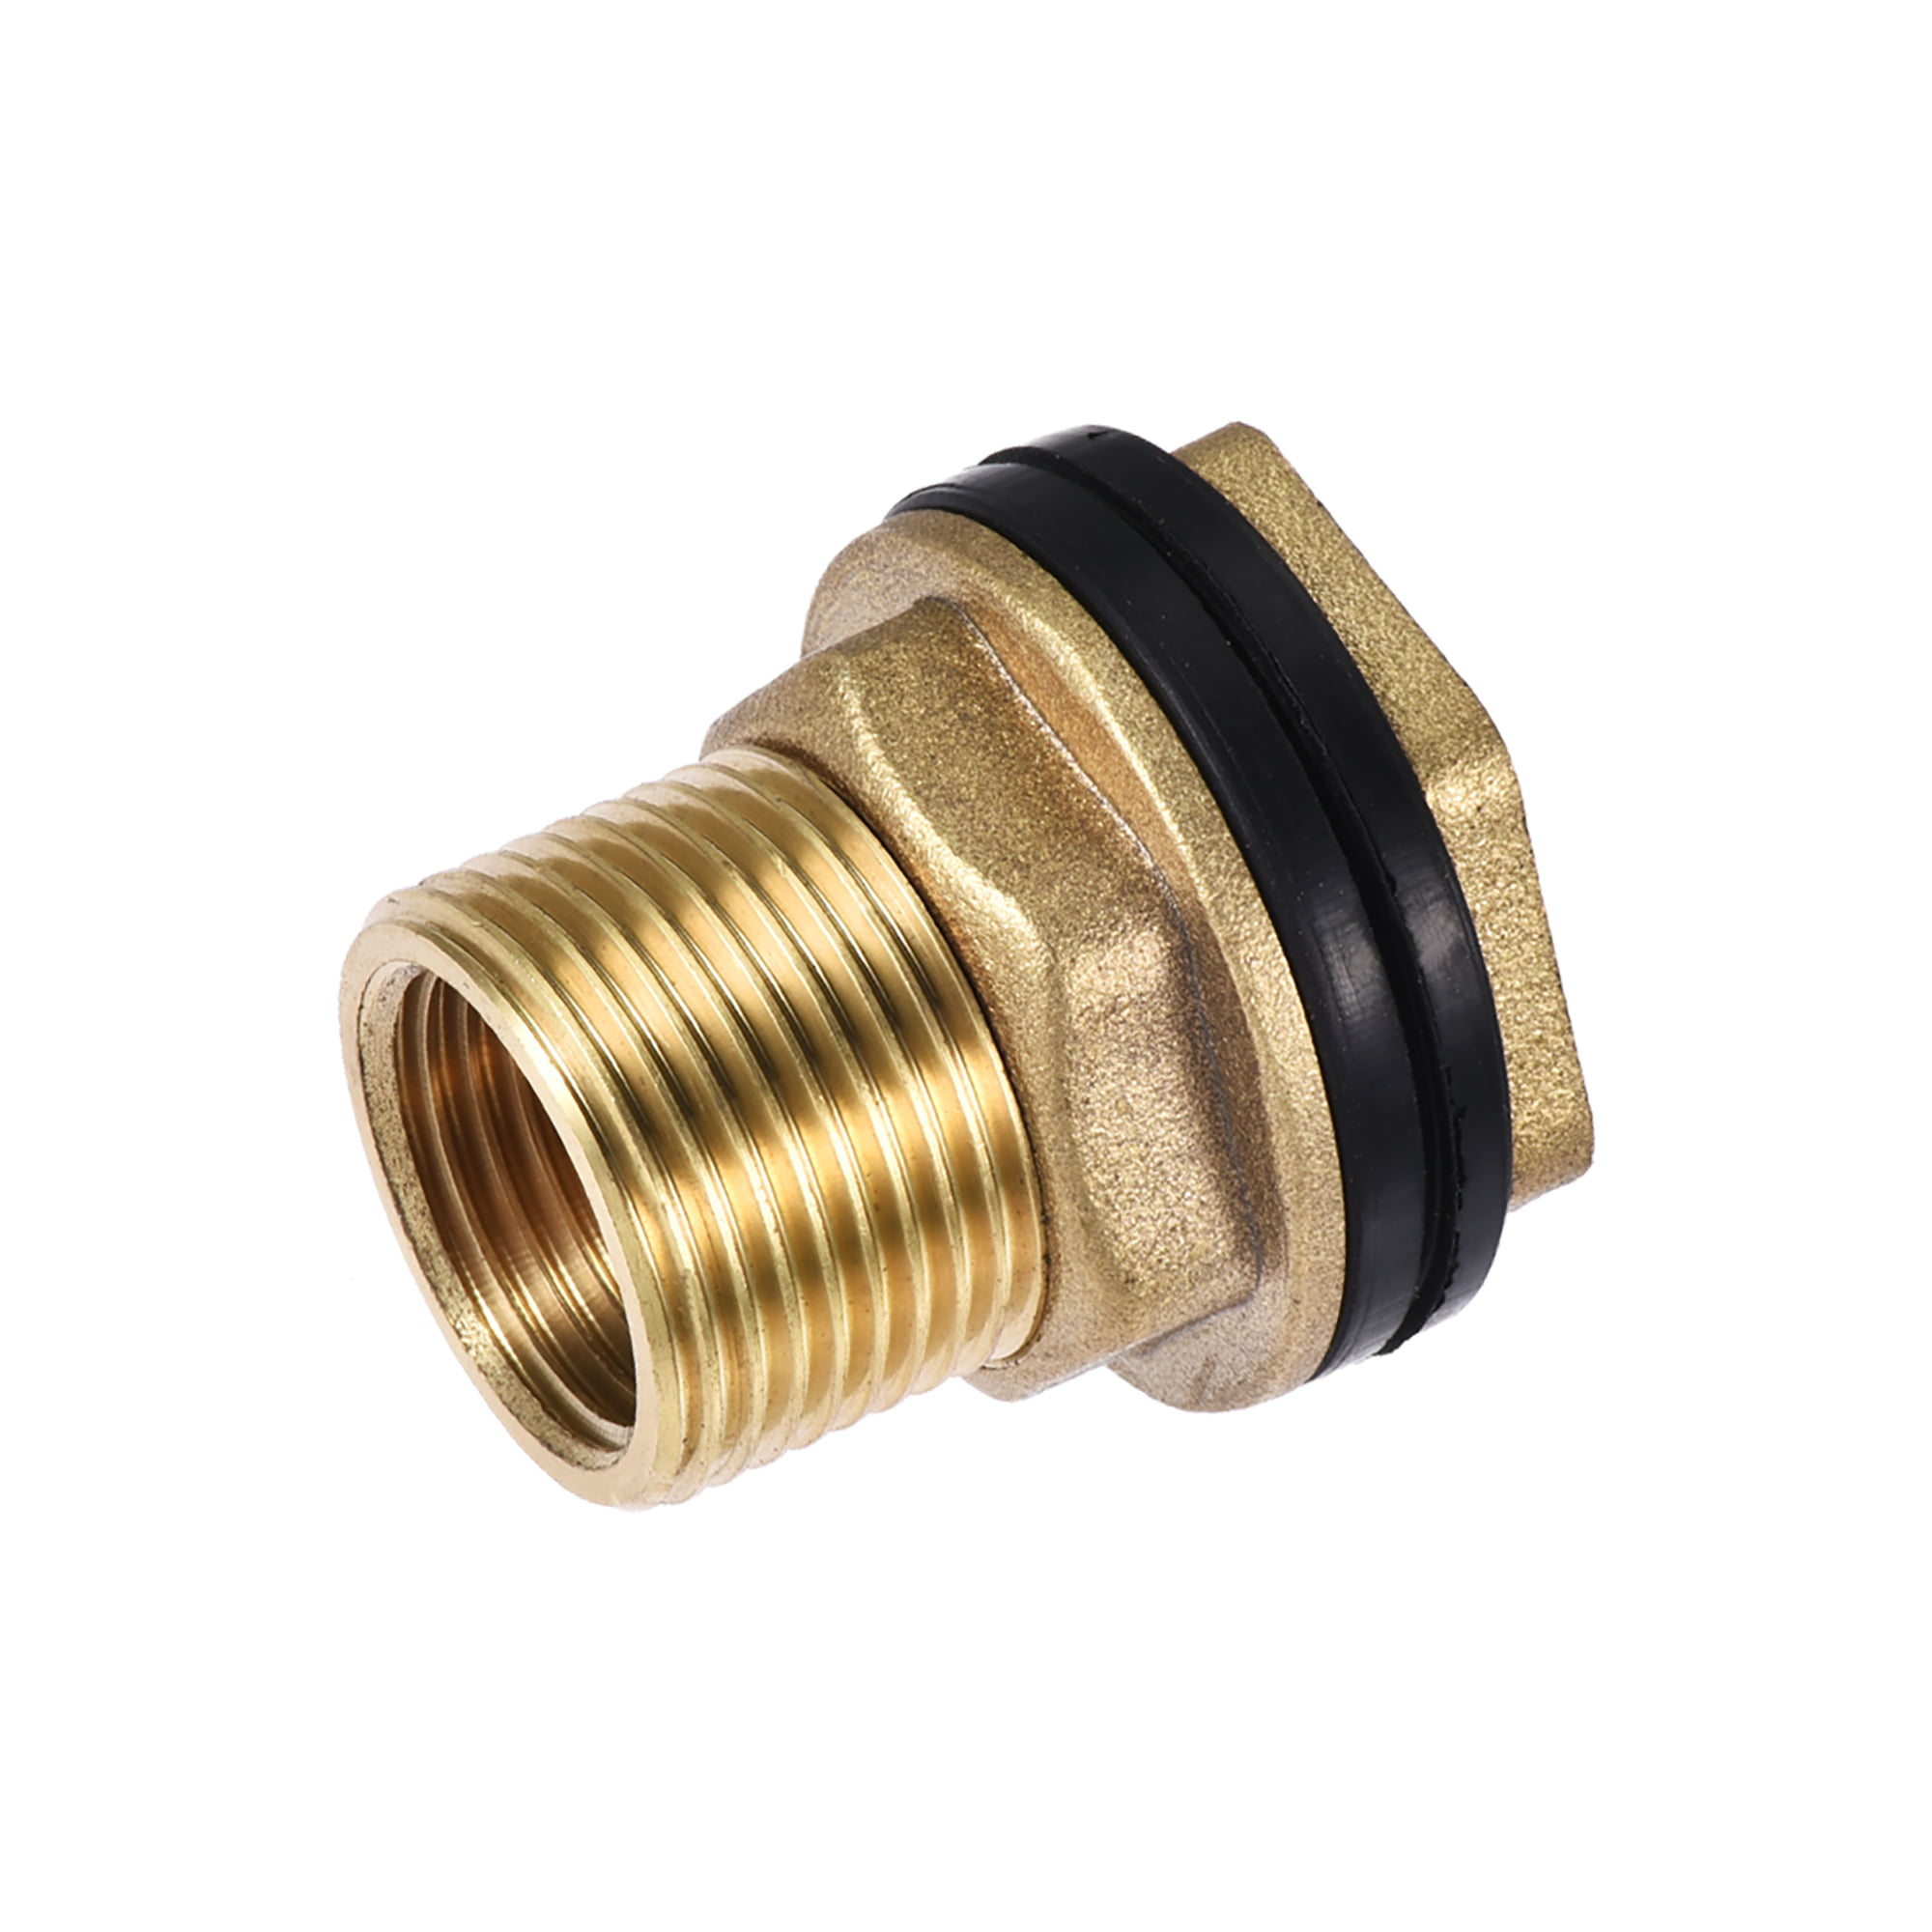 2 x New Compression Straight Female Iron 15mm x 1/2 Brass plumbing fittings